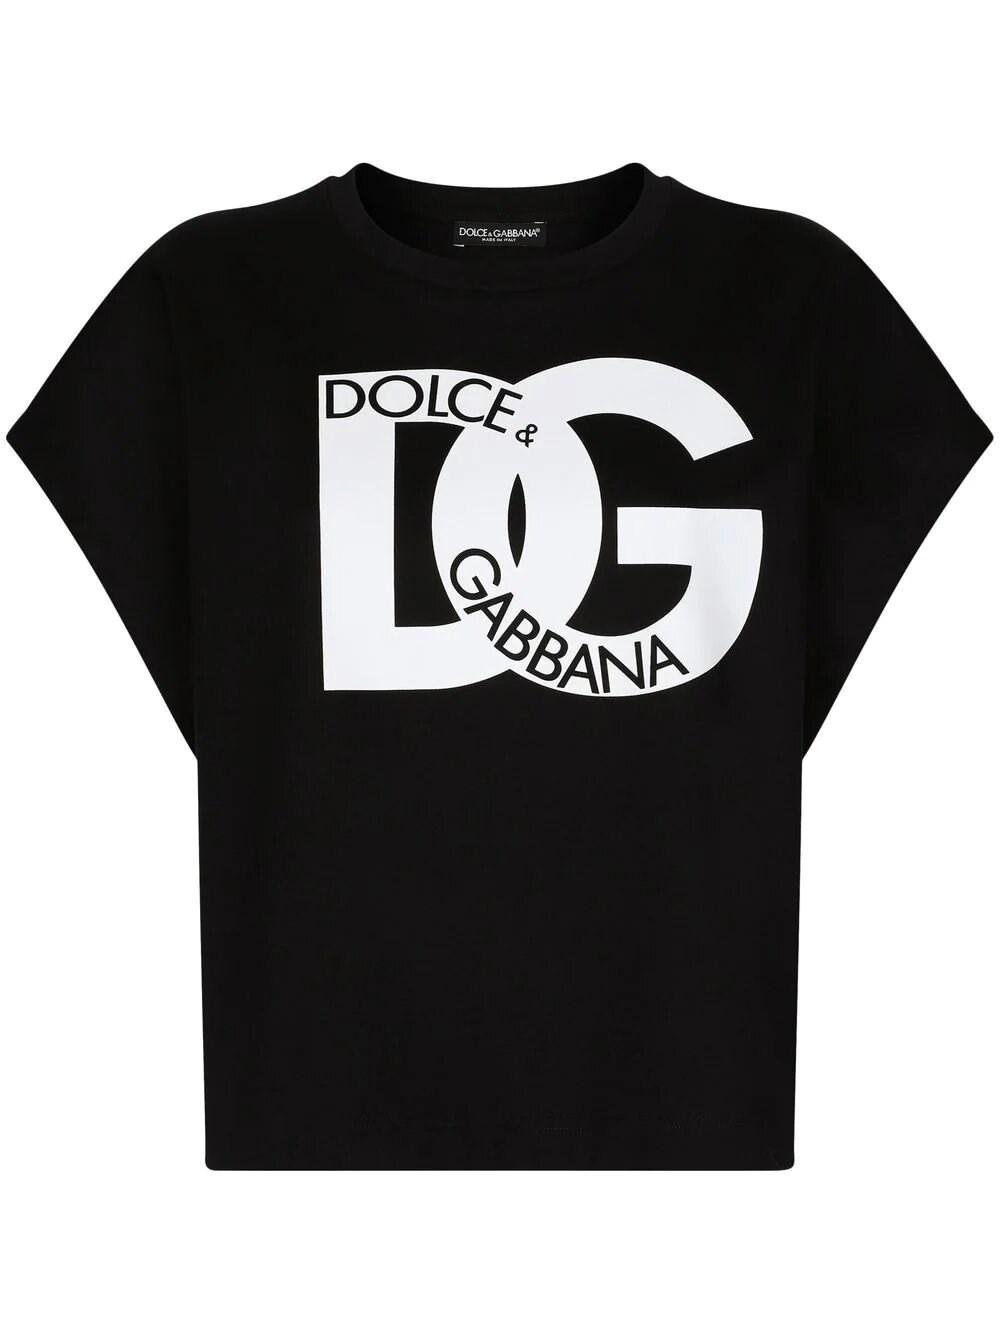 Dolce & Gabbana Jersey T-shirt With Dg Print in Black | Lyst